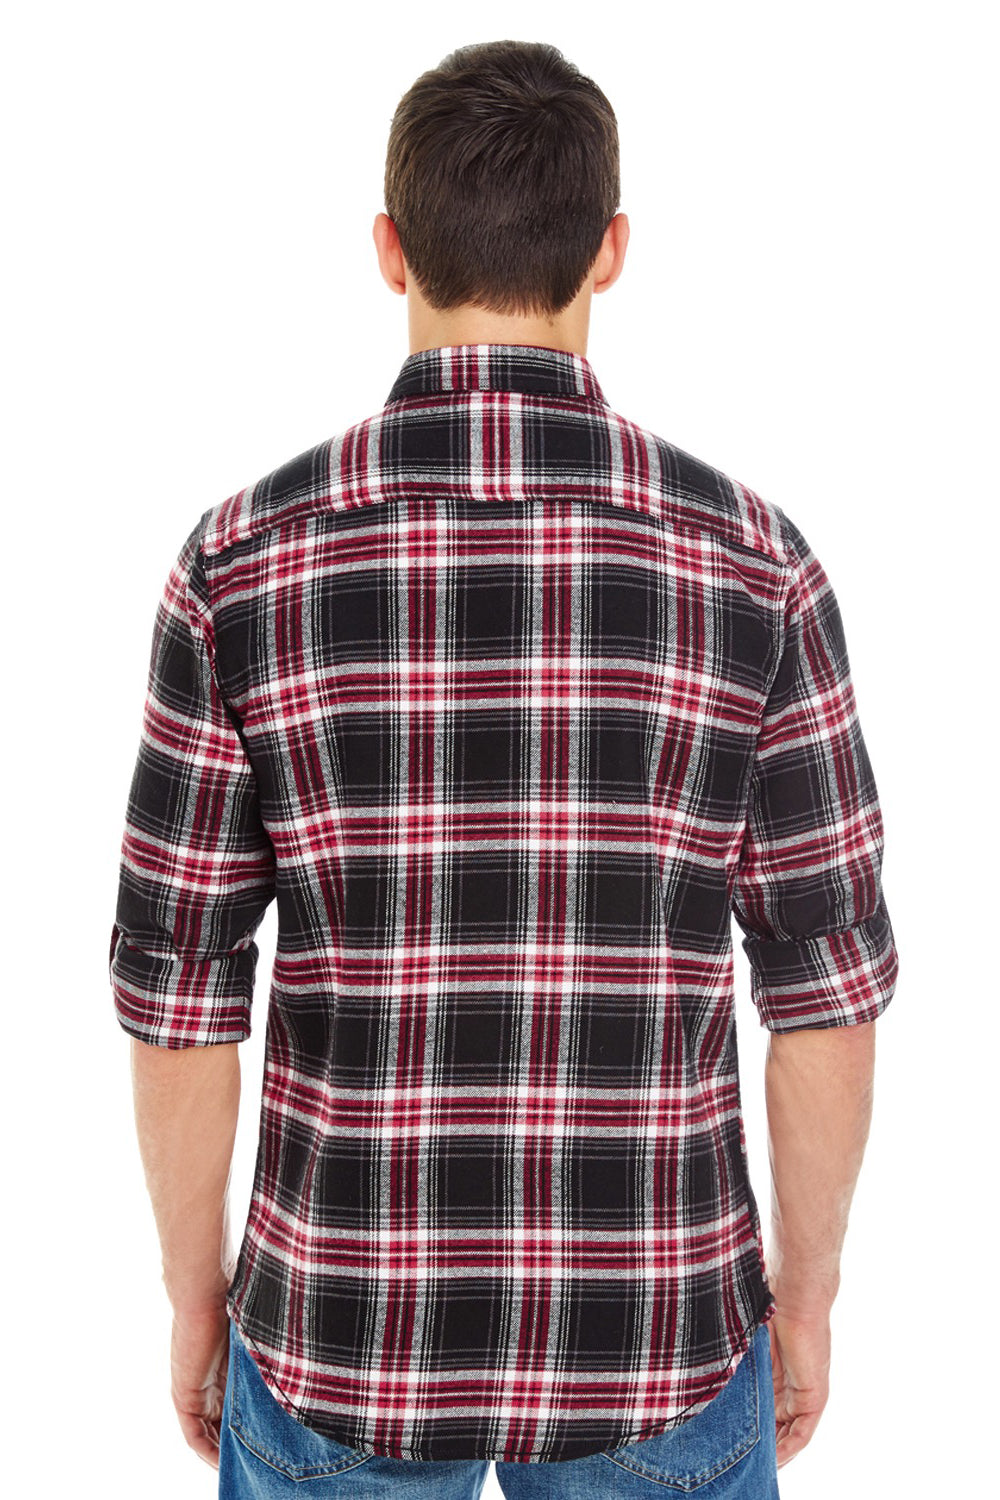 Burnside B8210/8210 Mens Flannel Long Sleeve Button Down Shirt w/ Double Pockets Red Model Back